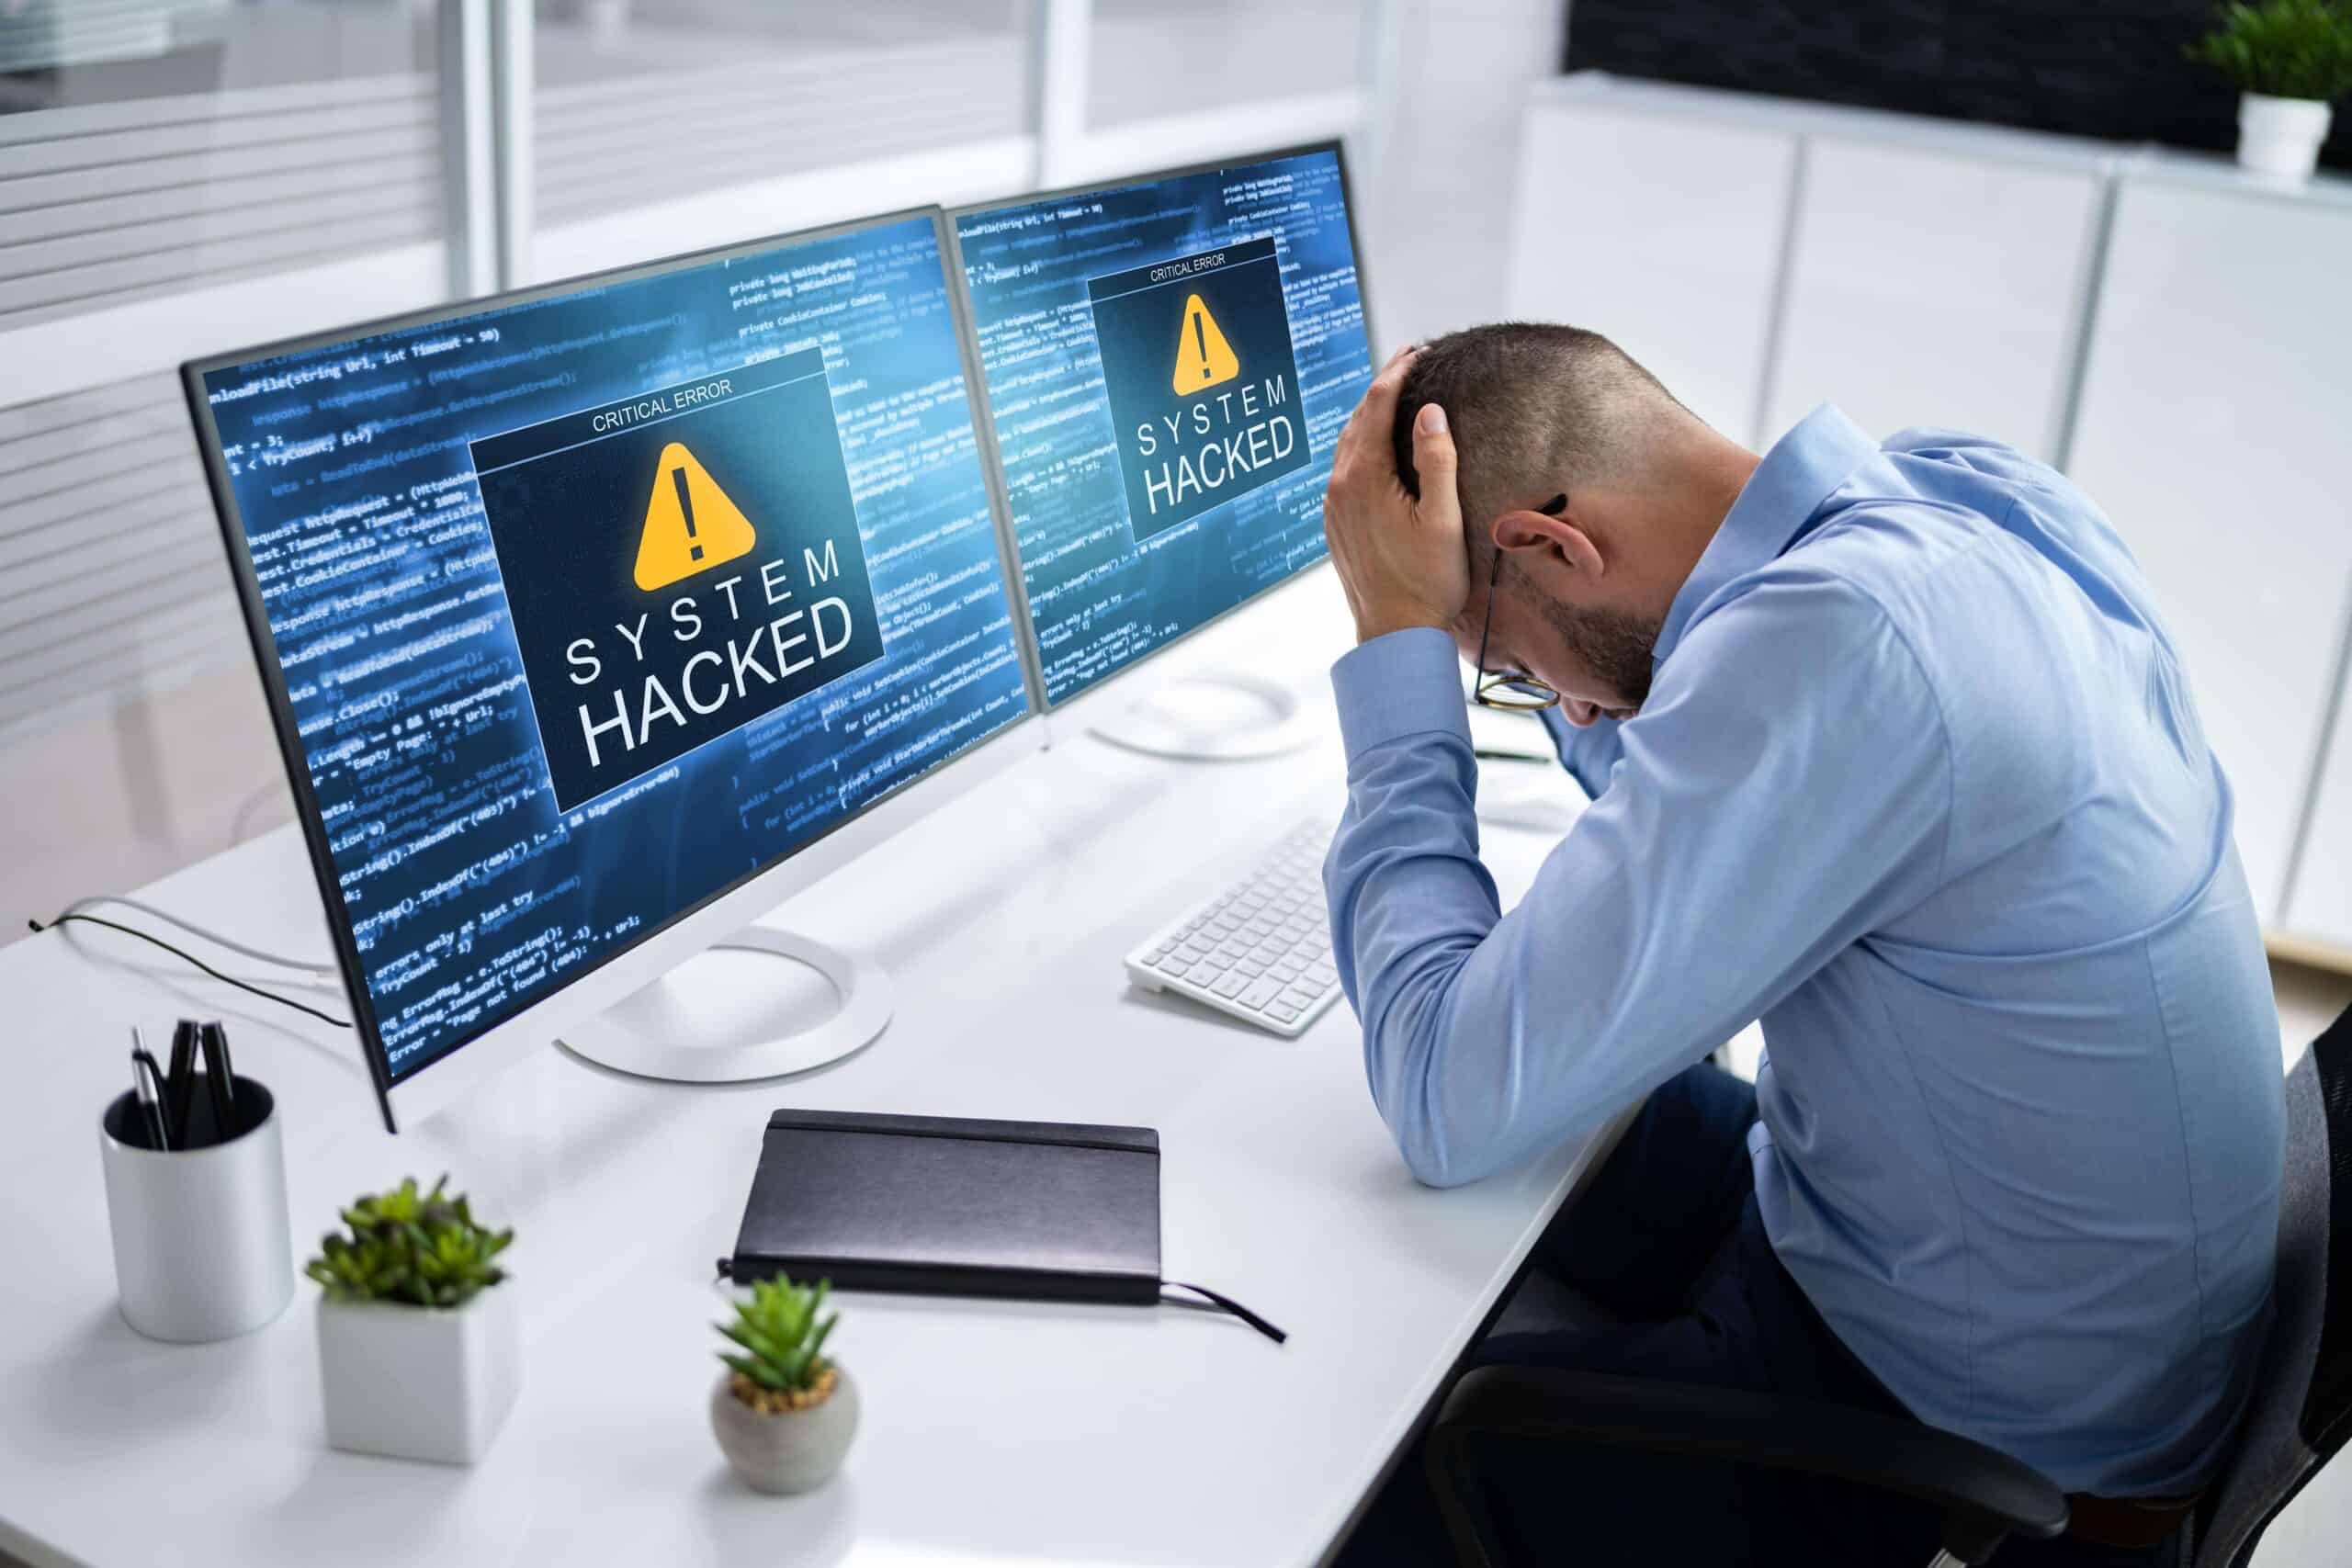 A stressed man in an office discovers his computer system has been hacked.